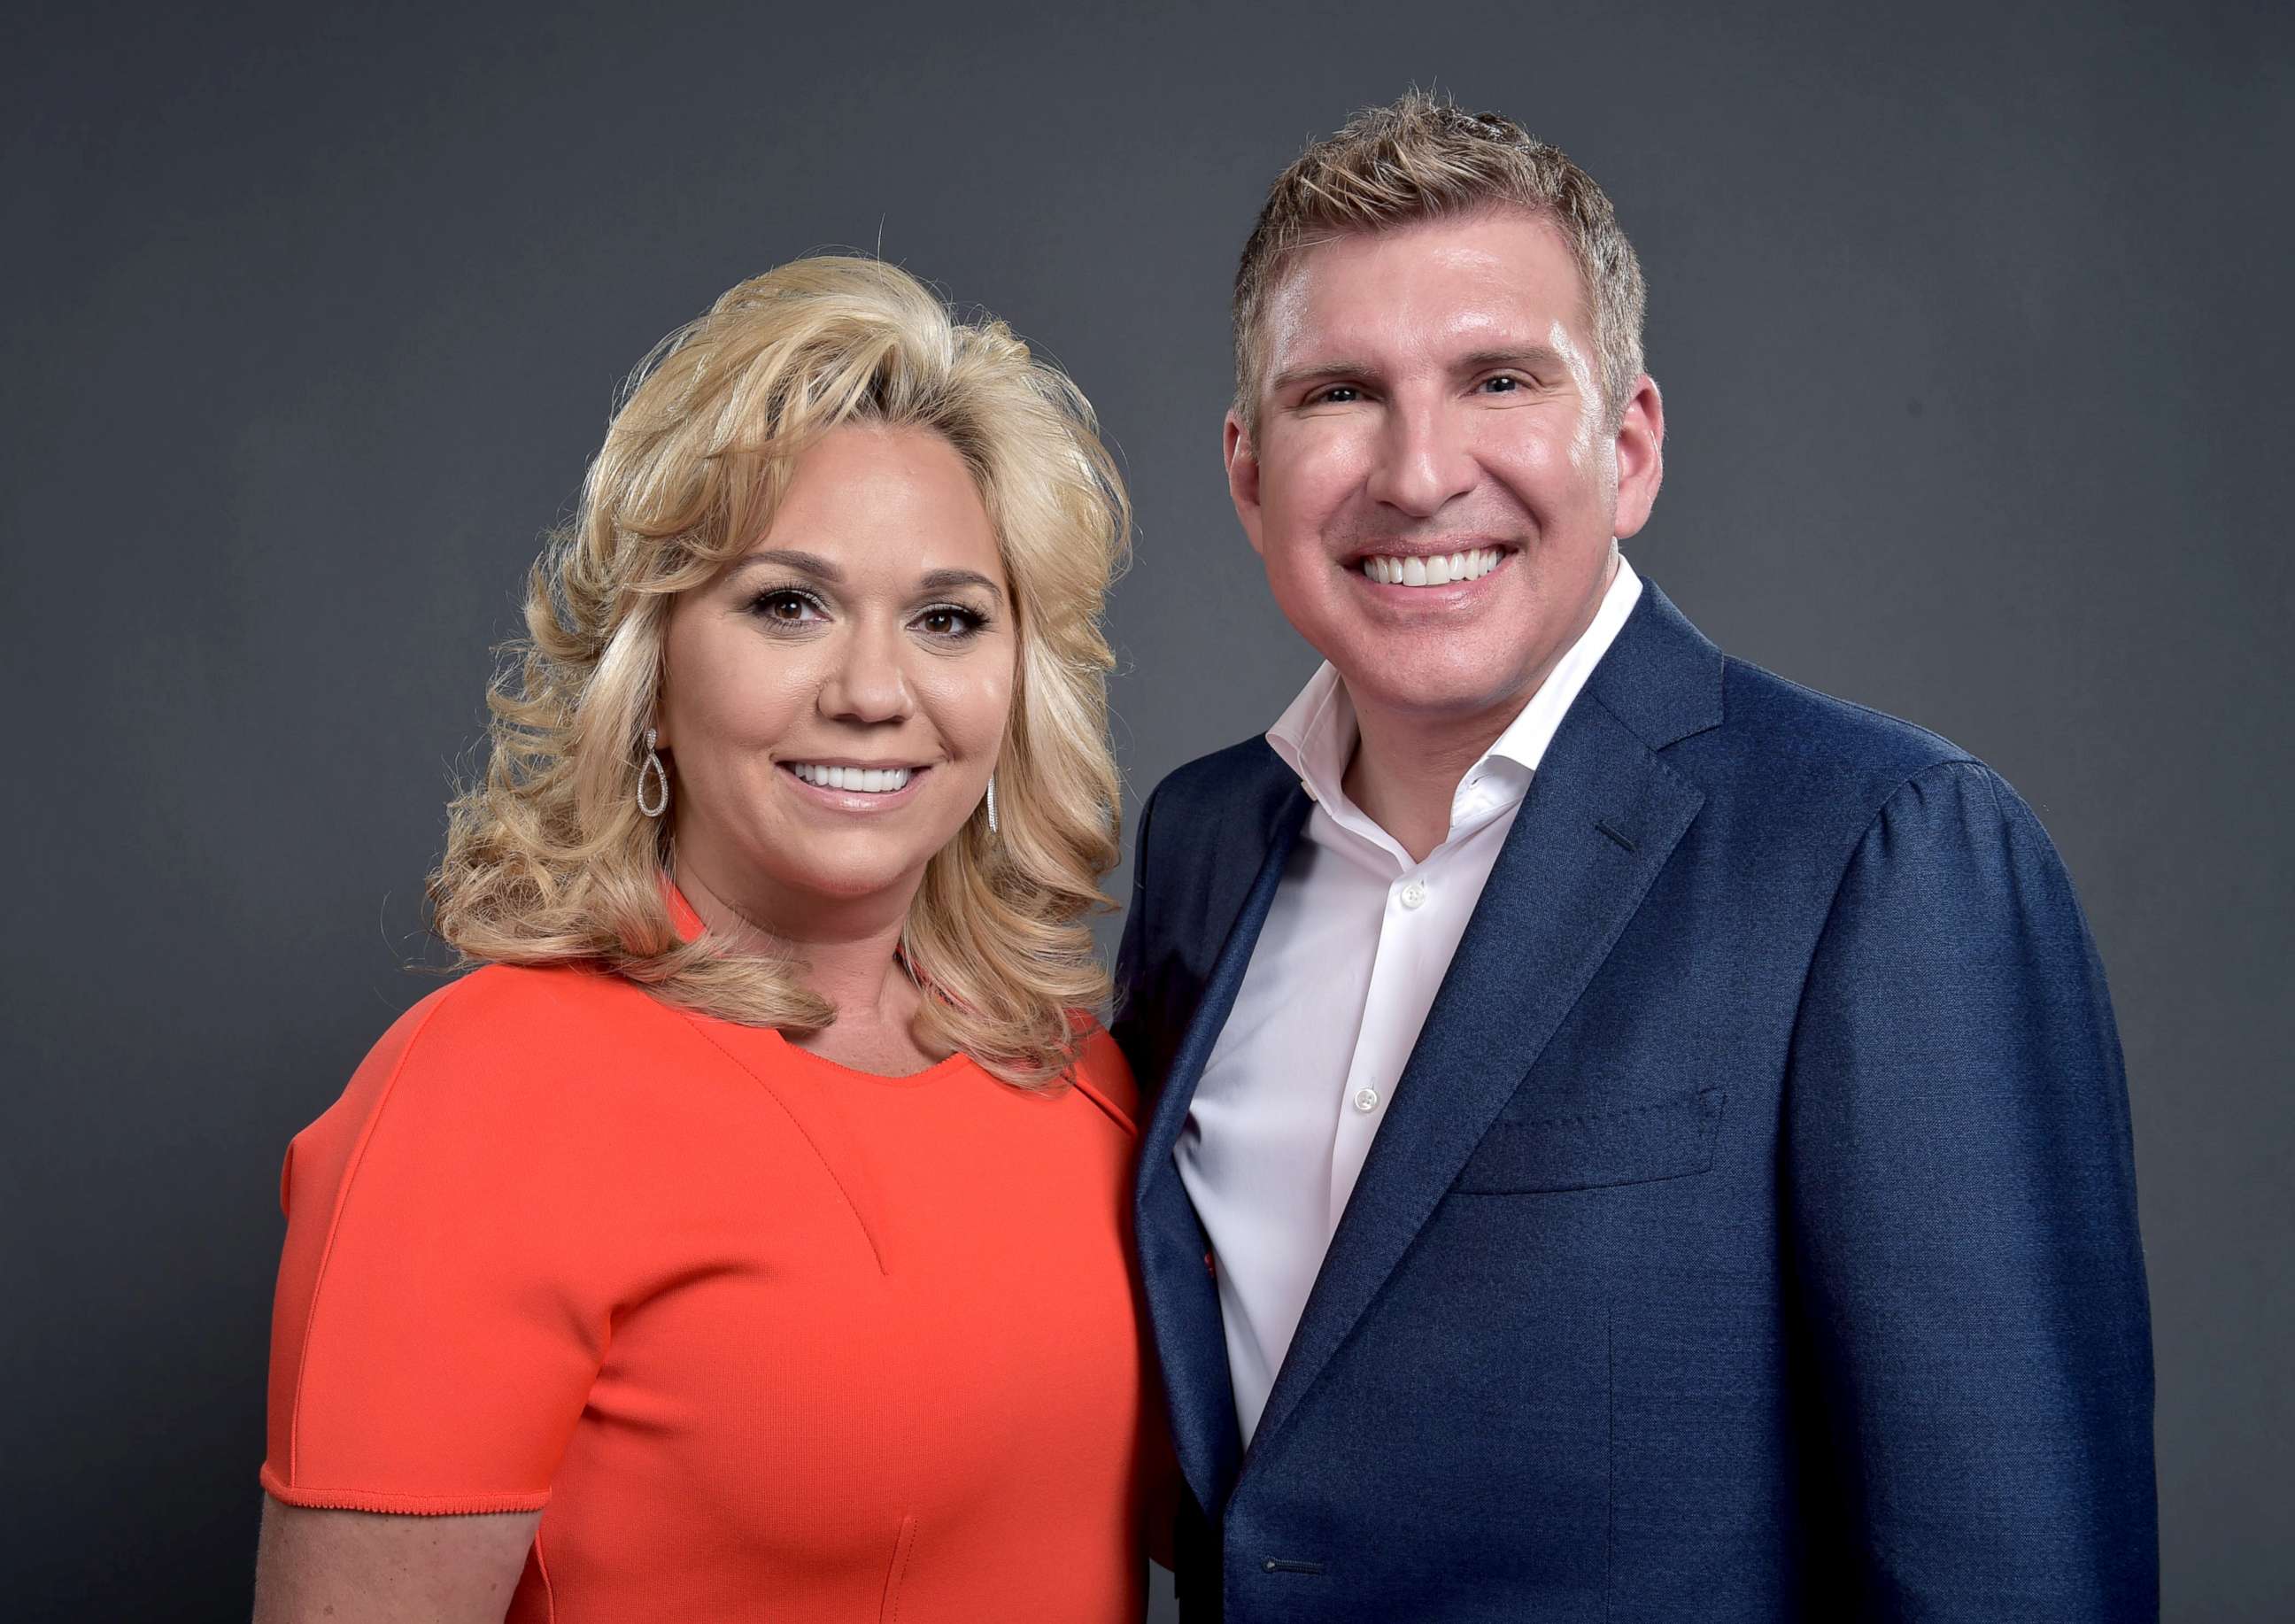 PHOTO: Julie Chrisley and Todd Chrisley of "Chrisley Knows Best" pose for a portrait during the NBCUniversal Summer Press Day at Four Seasons Hotel on April 1, 2016 in Westlake Village, California.